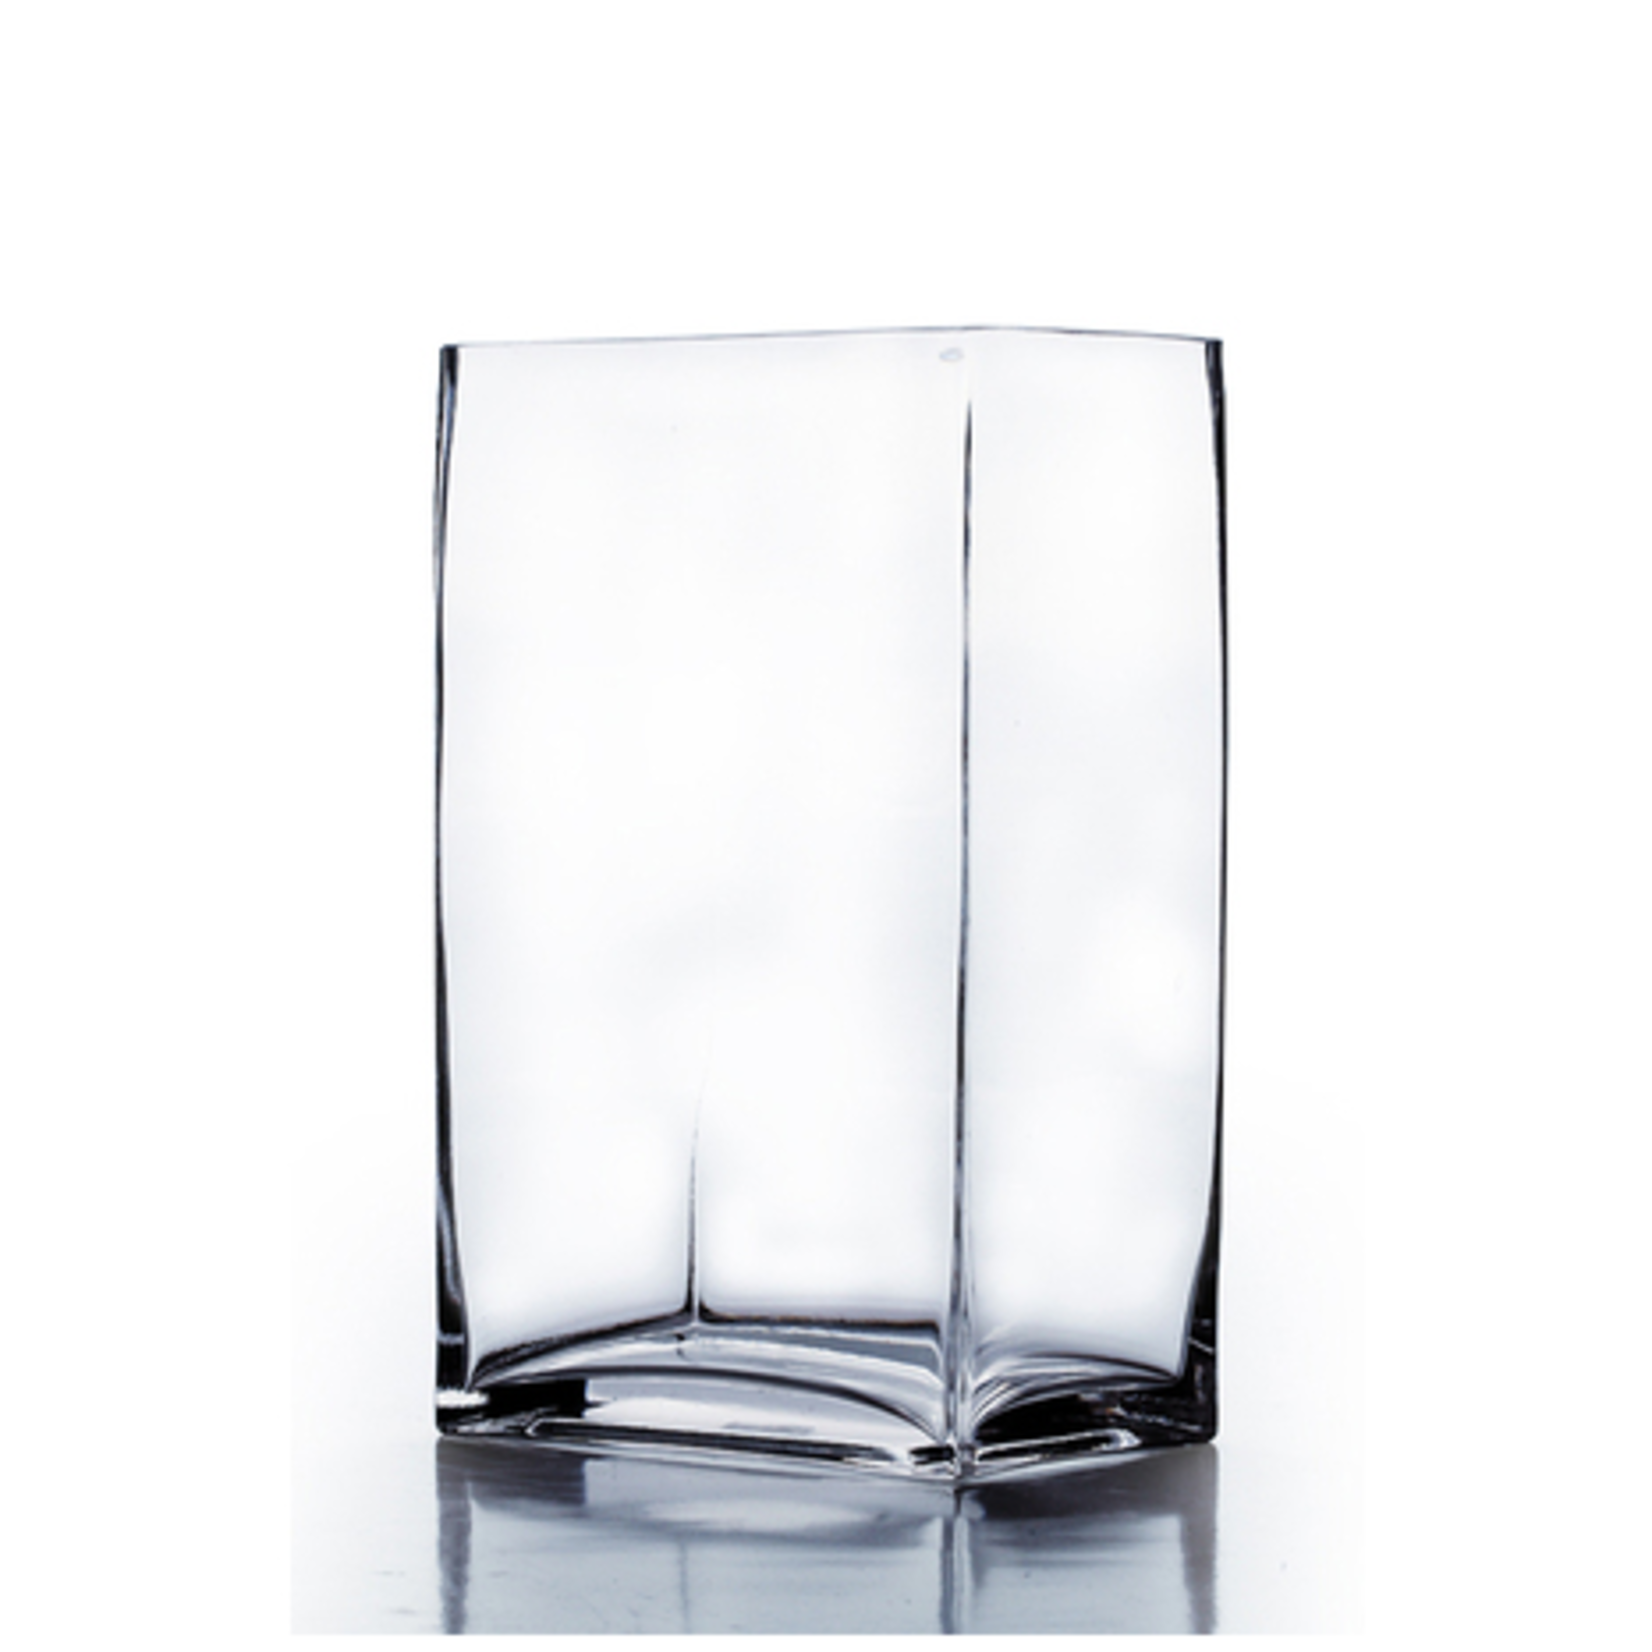 6"H 3" X 4" CLEAR GLASS RECTANGLE VASE